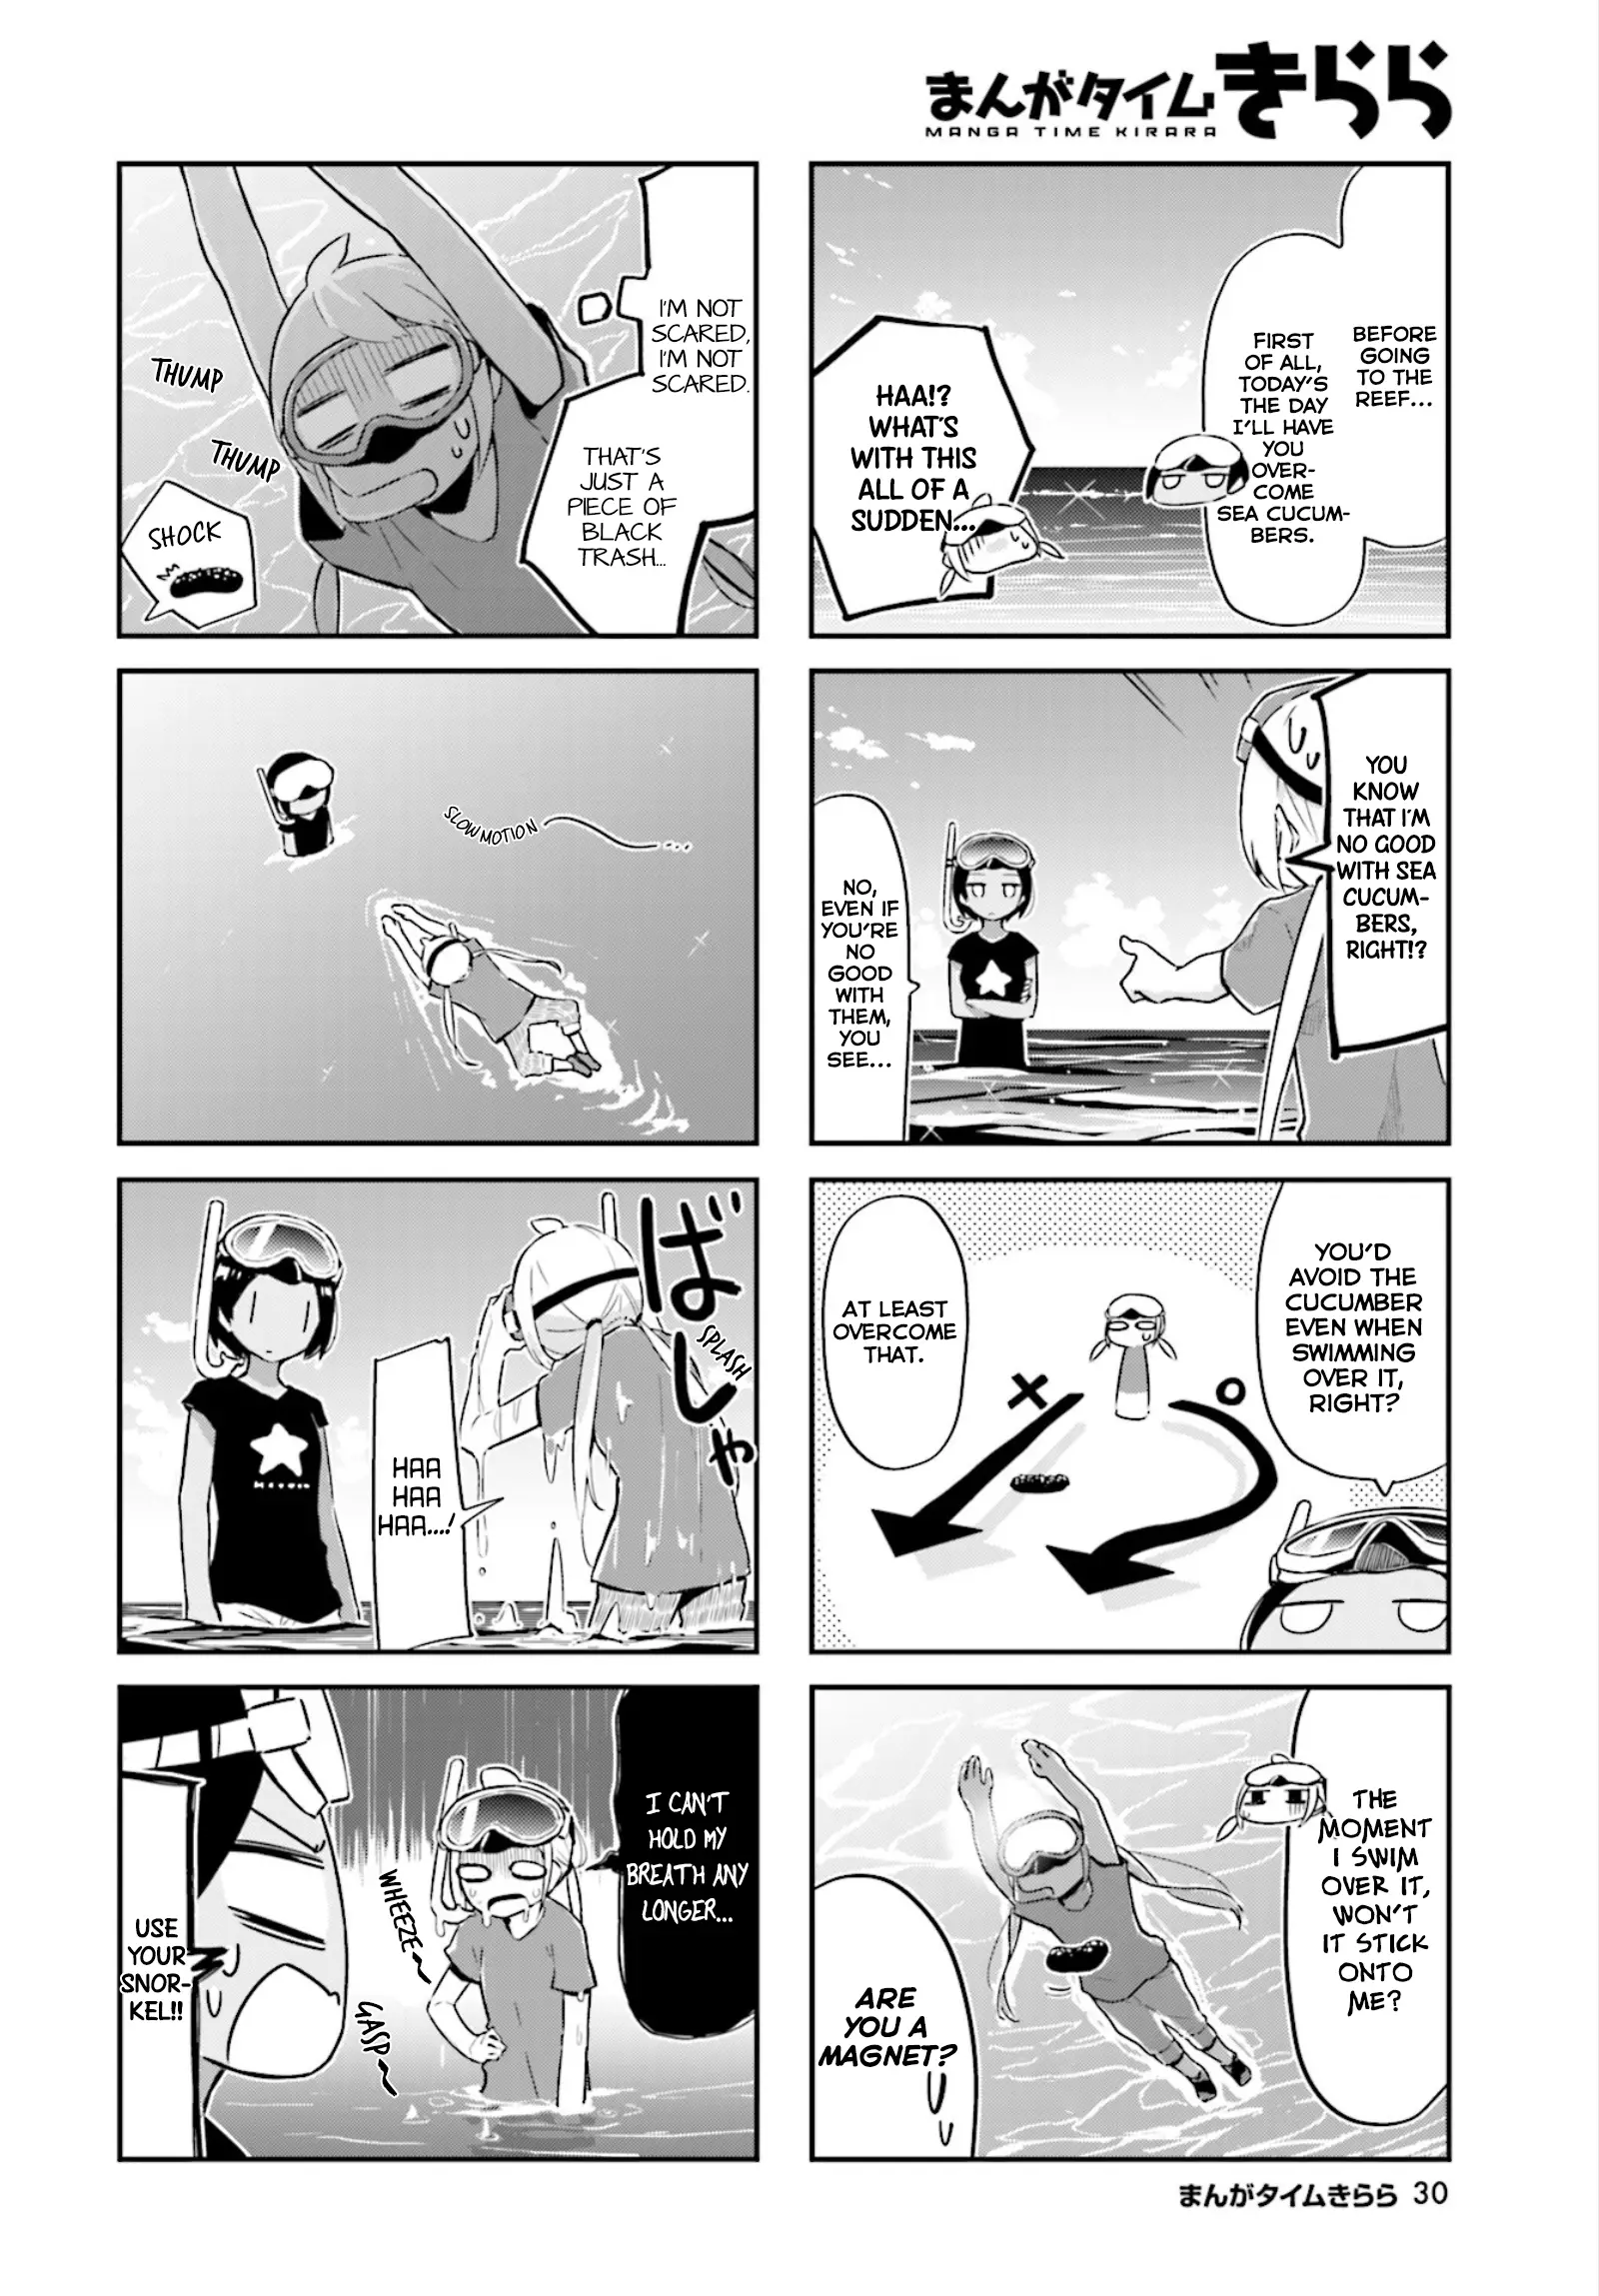 Umiiro March - 13 page 3